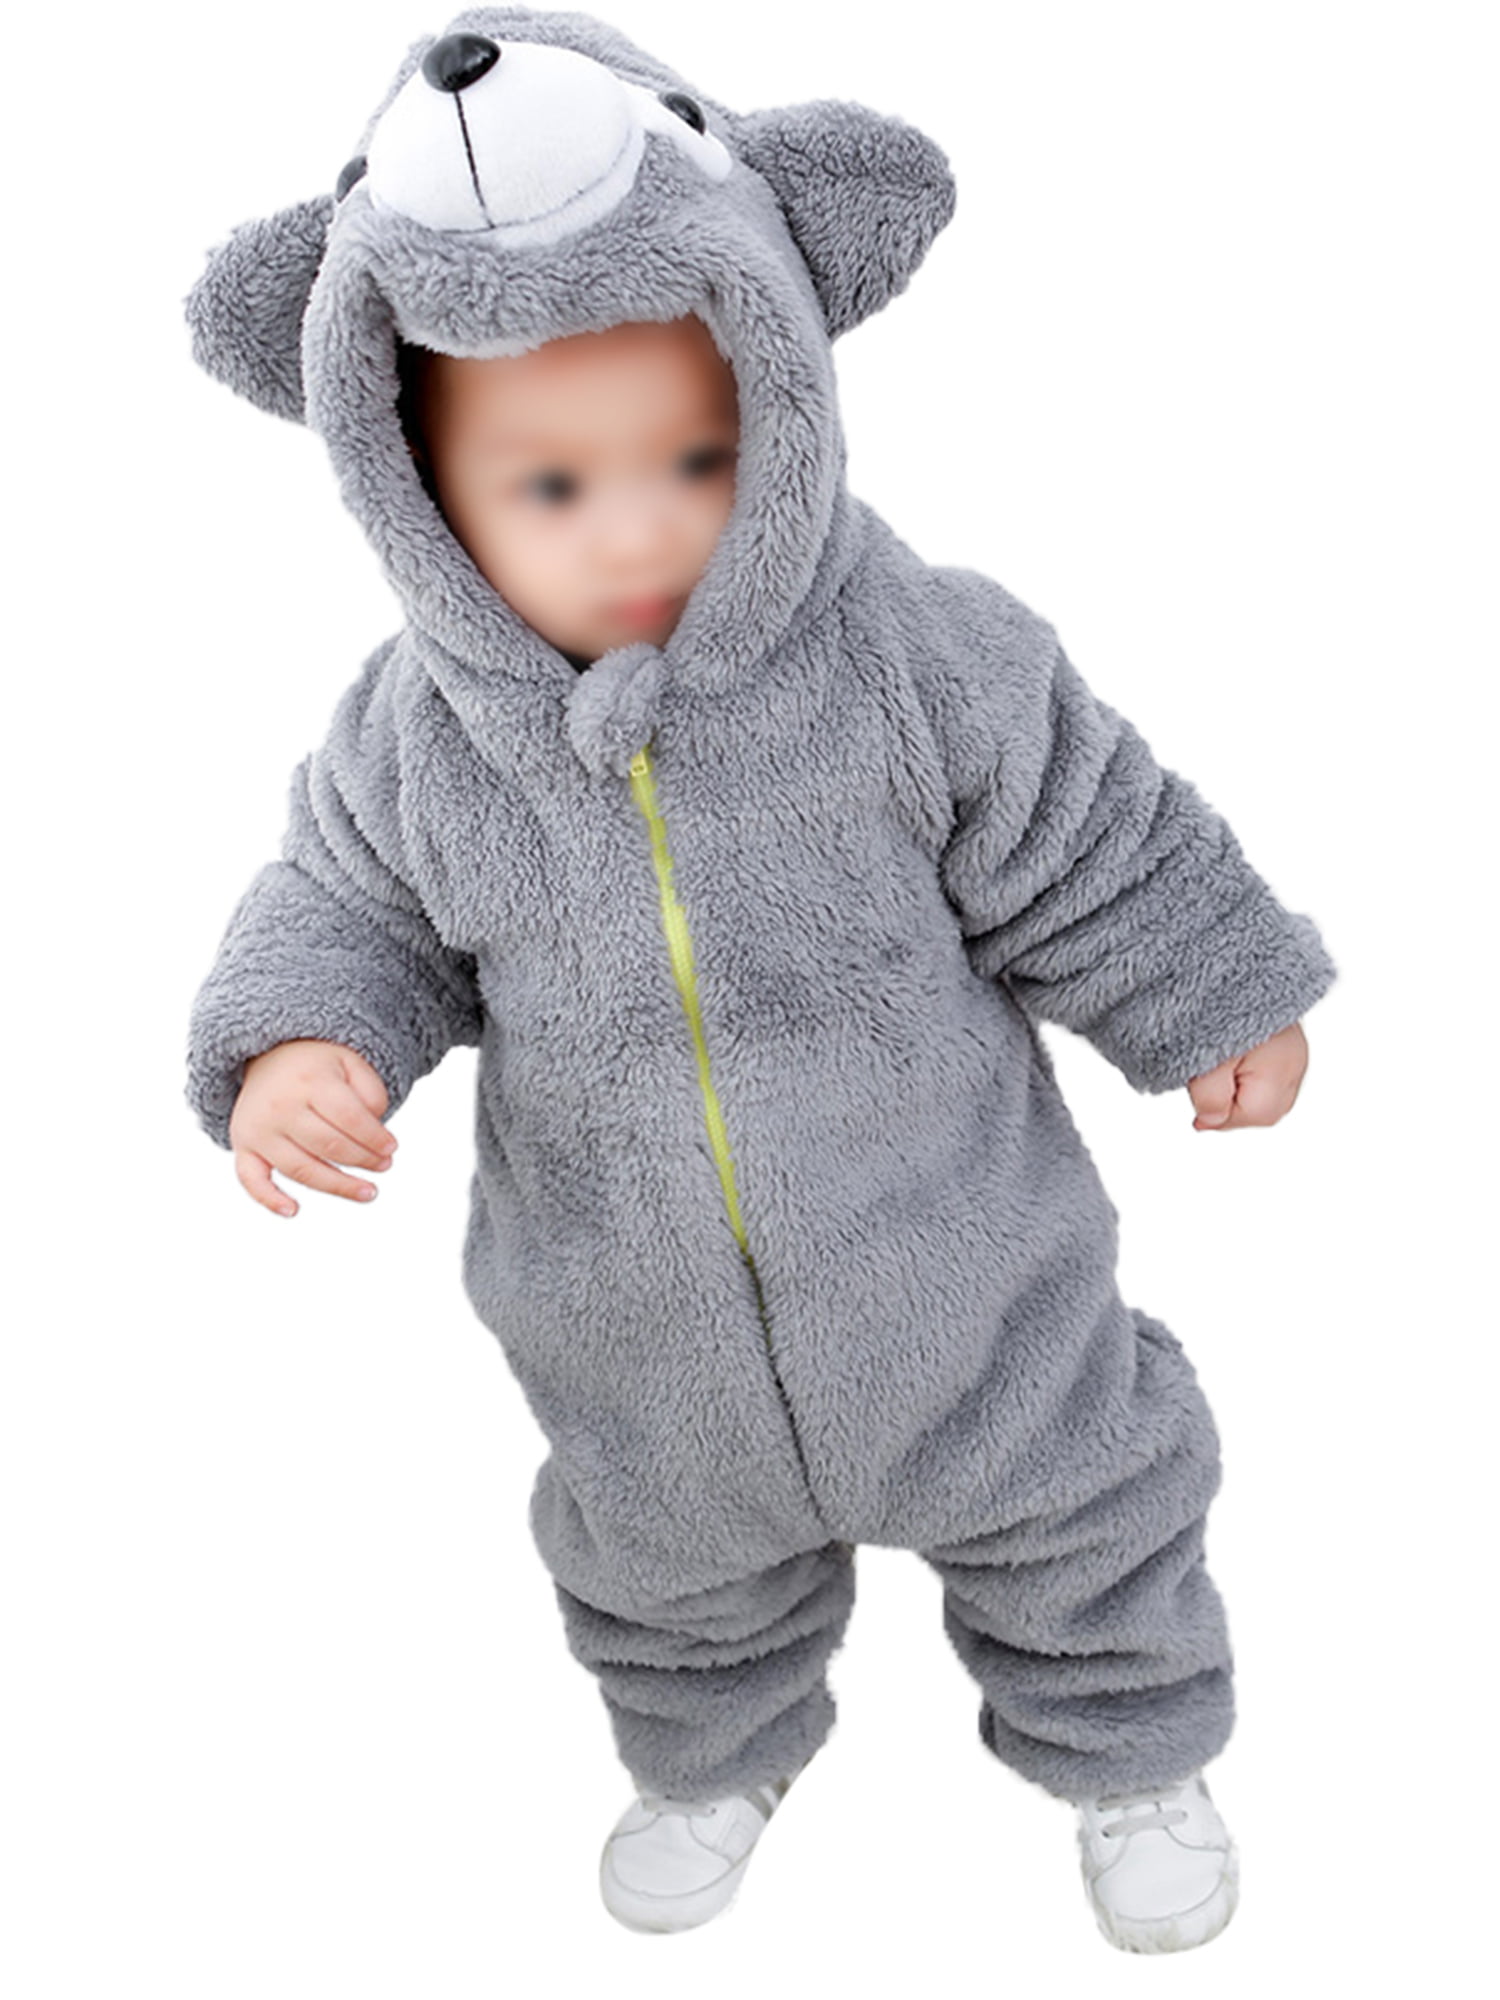 Baby Clothes Set,Newborn Toddler Baby Boys Girls Hooded Romper Jumpsuit Thickened Outfits Clothes 